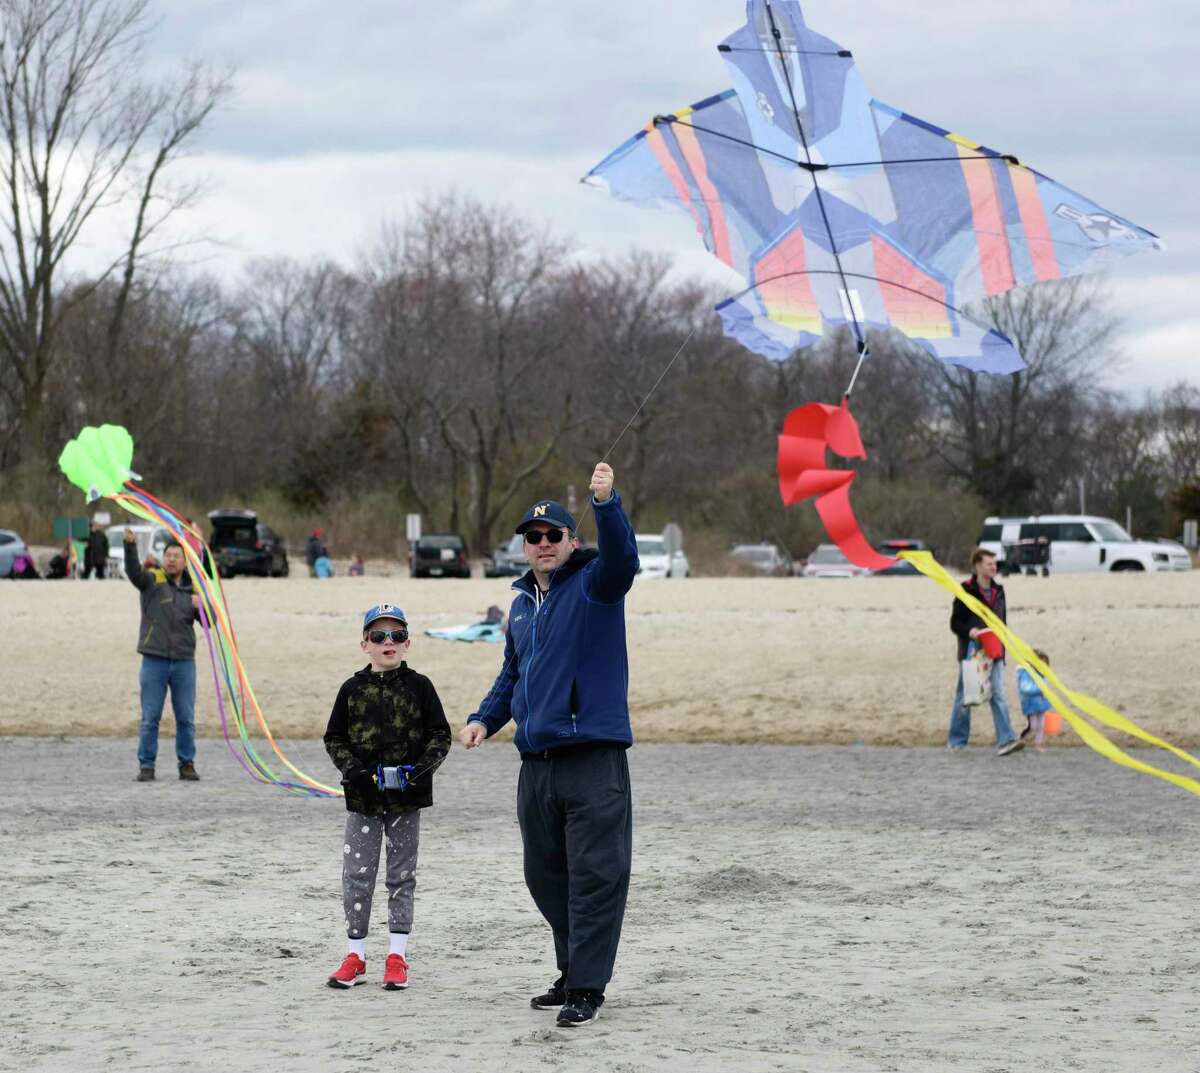 Greenwich's Oded Kafka and his son, Max Kafka, 7, fly a kite during the annual Kite Flying Festival at Greenwich Point Park in Old Greenwich, Conn. Sunday, April 10, 2022. Greenwich Recreation and Greenwich Arts Council partnered to host the festival, which atrracted hundreds of kite flyers on a perfectly windy day at the beach.